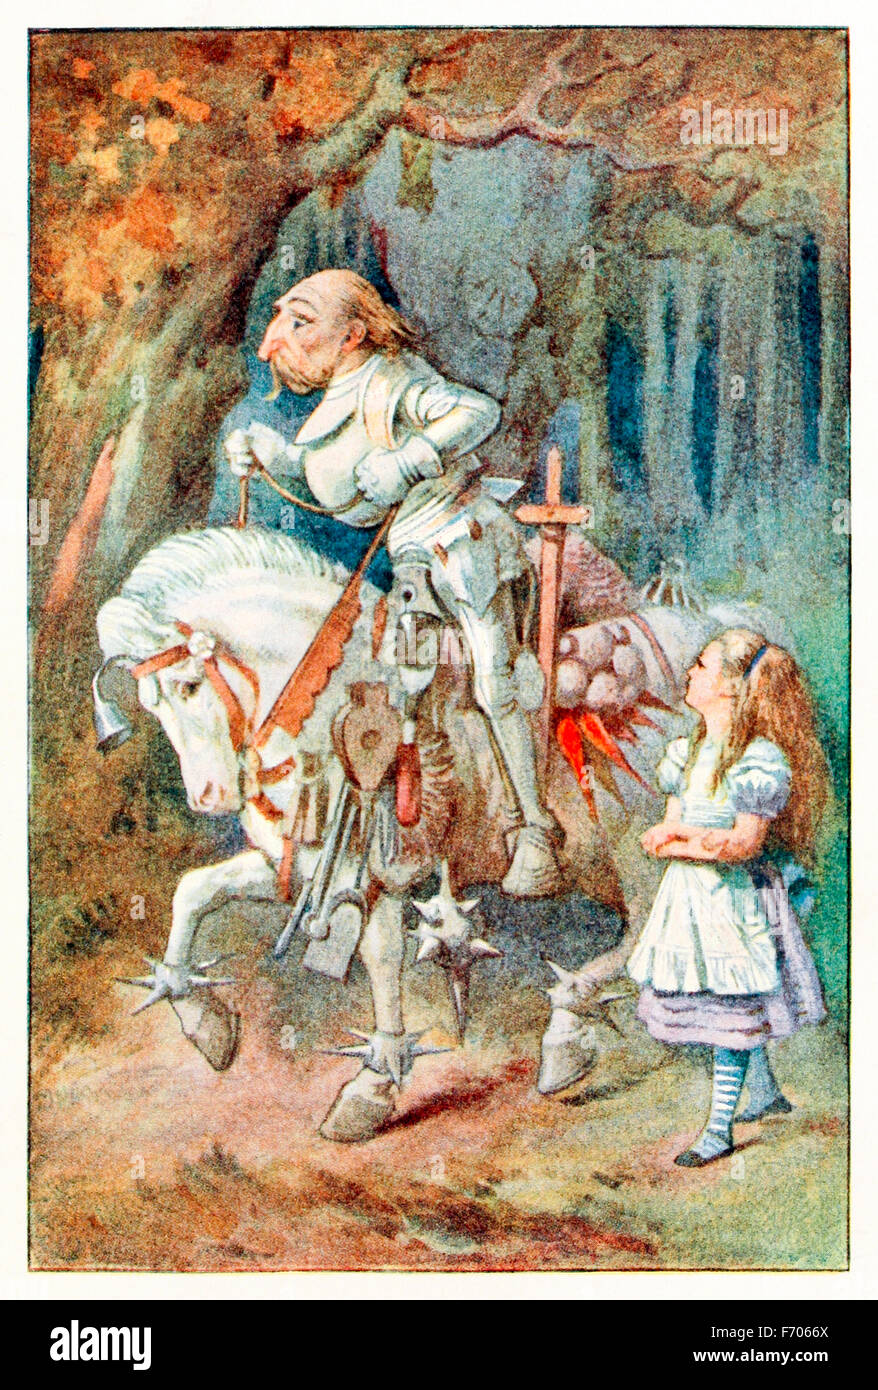 'The White Knight' from 'Through the Looking-Glass and What Alice Found There' by Lewis Carroll (1832-1898), illustrated by Sir John Tenniel. See description for more information. Stock Photo